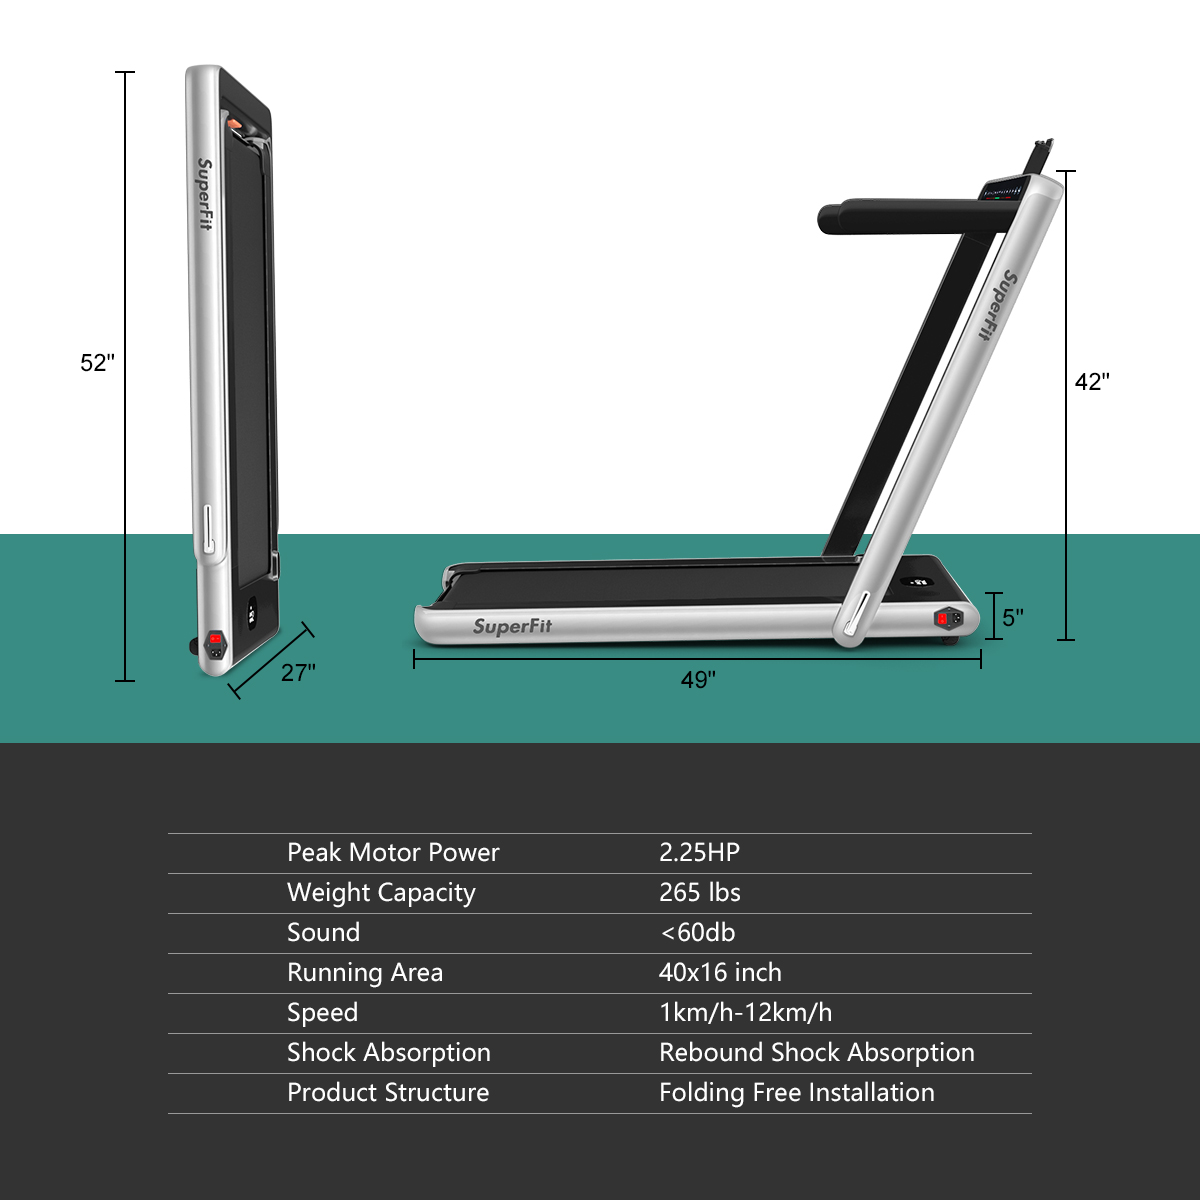 Gymax 2 in 1 Folding Treadmill 2.25HP Running Machine w/ Dual Display Silver - image 2 of 9